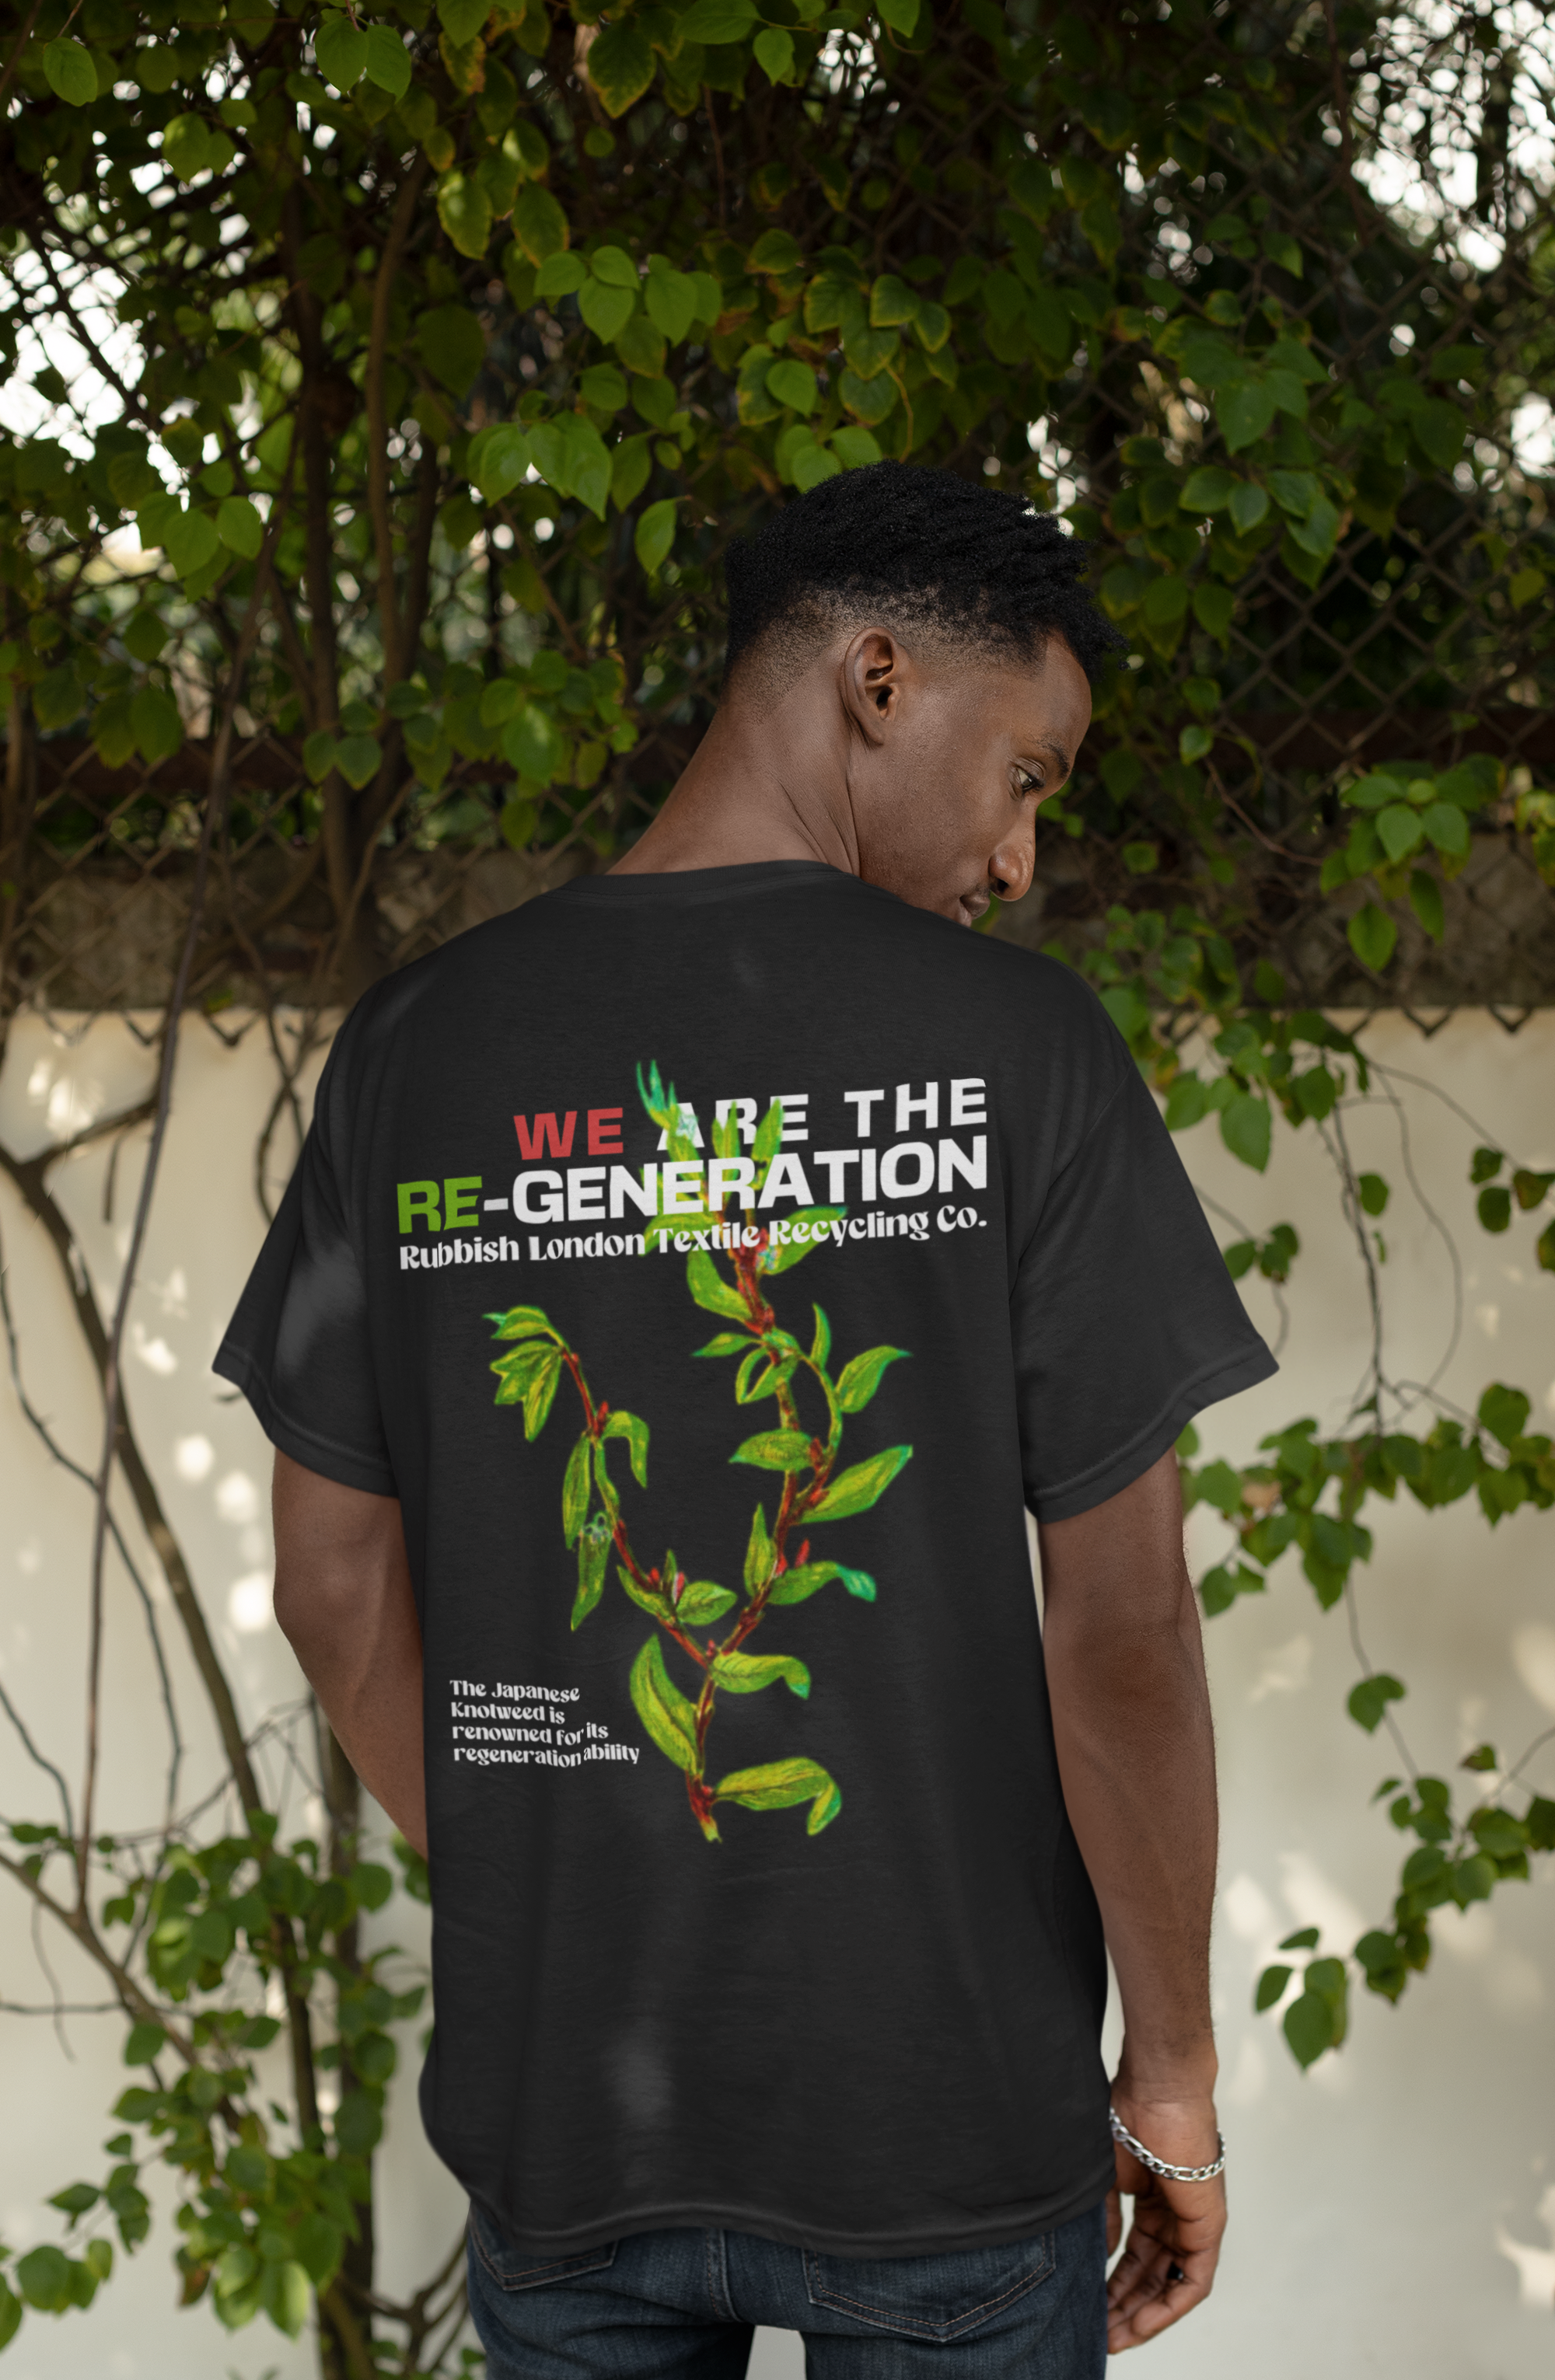 We are the Re-Generation Trash T-Shirt.